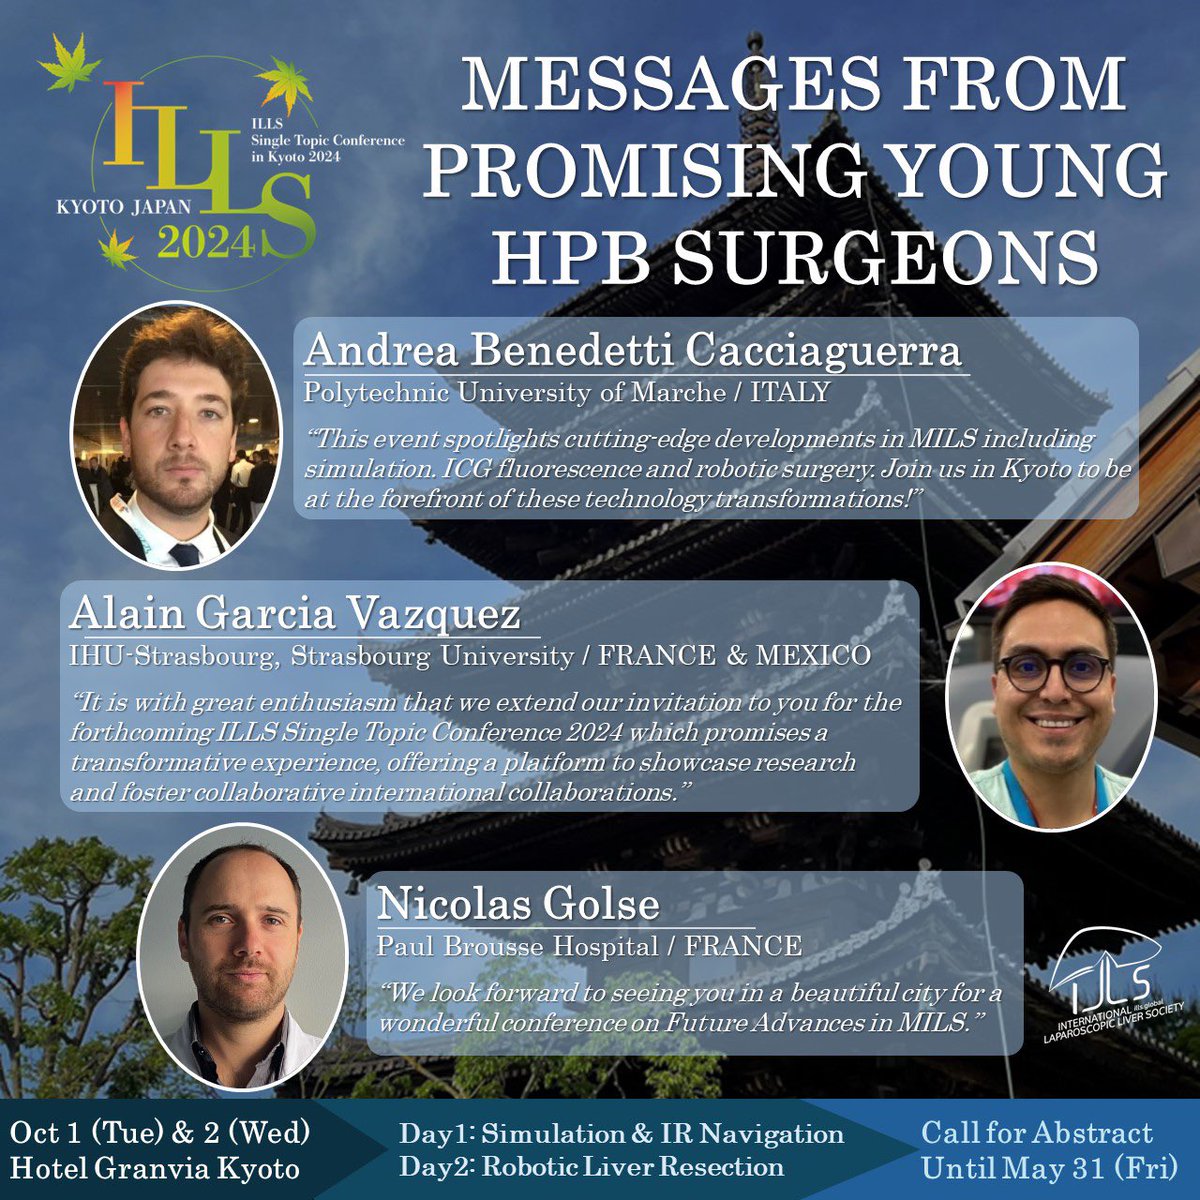 Who is coming to Japan along with them🤗?! We expect more and more participation and opinions from young & powerful #hpb surgeons to the discussion during #ILLS2024 in #Kyoto next October🇯🇵 🌍👩🏻‍⚕️🧑🏽‍⚕️👨🏼‍⚕️🌏 📩ABSTRACT SUBMISSION UNTIL MAY 31 🌟Visit: c-linkage.co.jp/ills-stc2024/